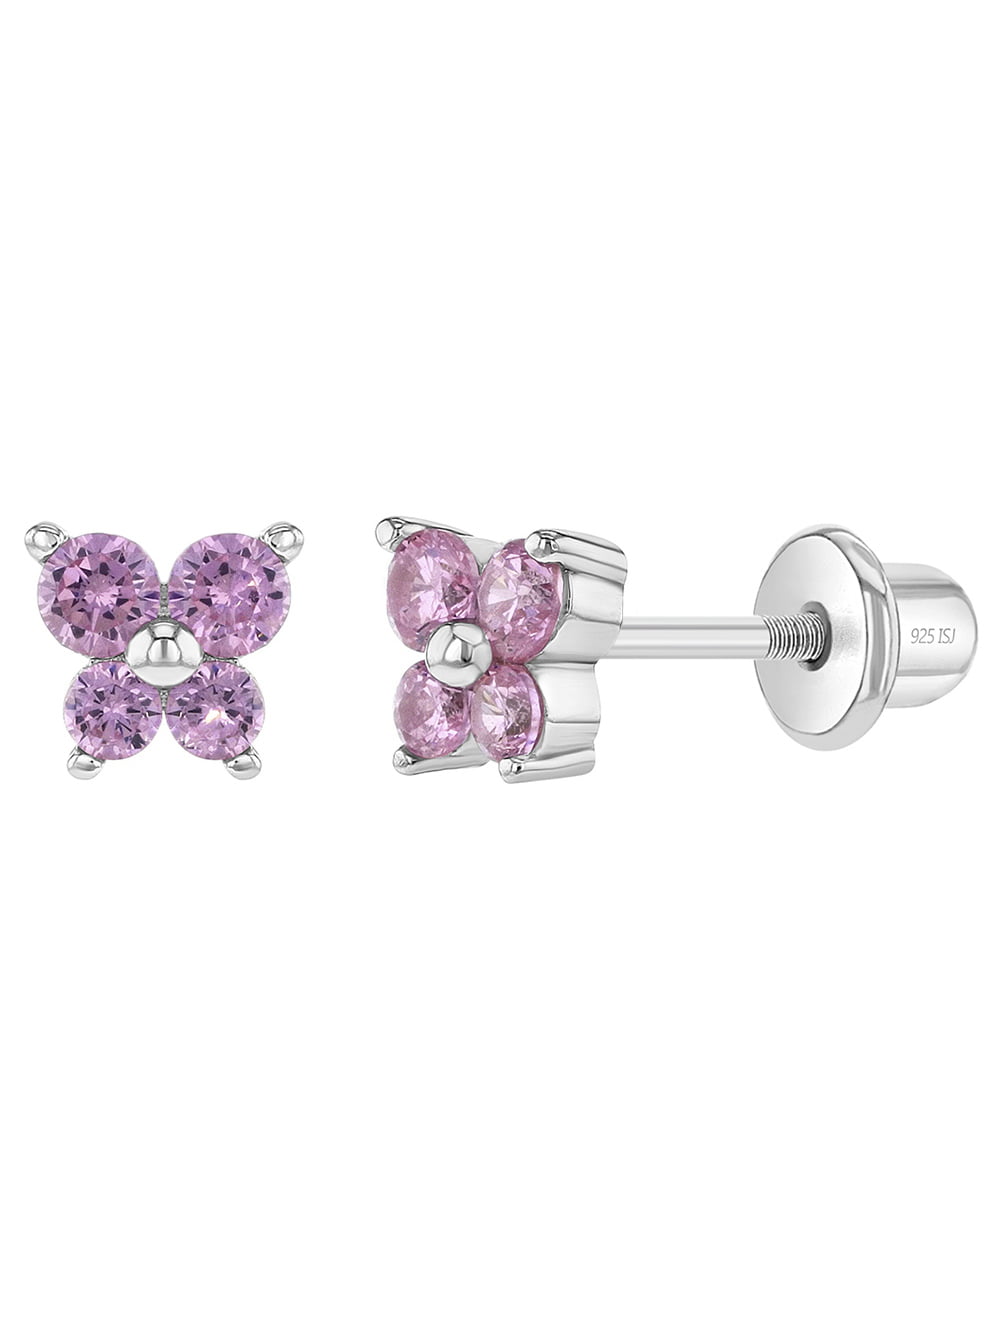 925 Sterling Silver Butterfly CZ Screw Back Earrings for Toddlers Young Girls 